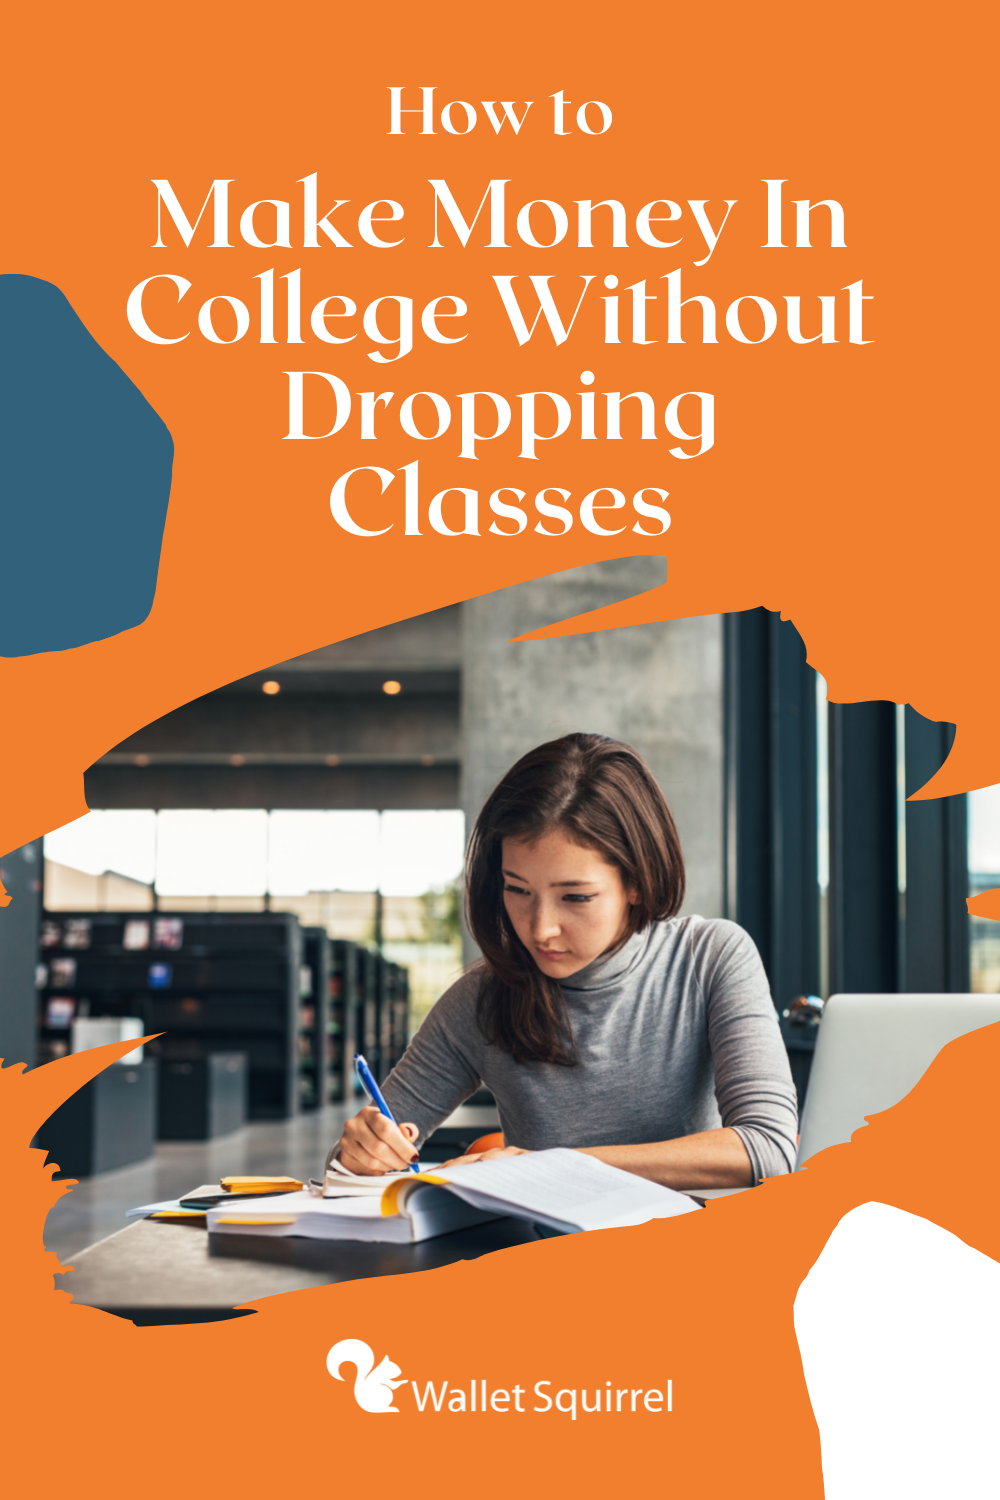 How to make money in college can be a challenge but is almost a necessity nowadays with how expensive things have become. Unless you don't mind coming out of college with $50,000 or more in student loan debt, you need to find ways to make money in college.